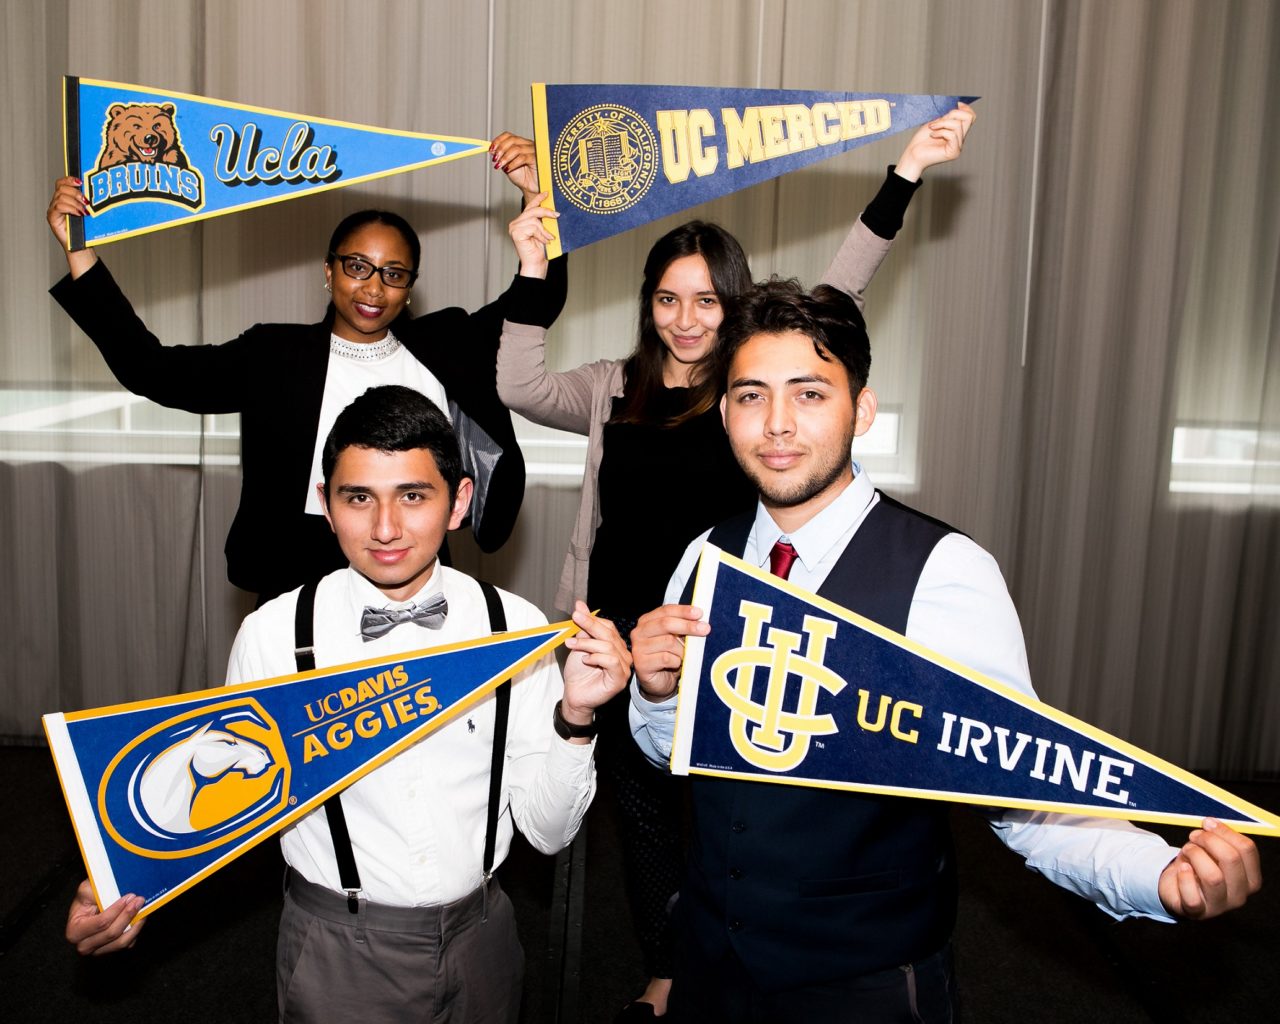 Four of Aspire's Shining Stars graduates holding their college pennants in their hands.